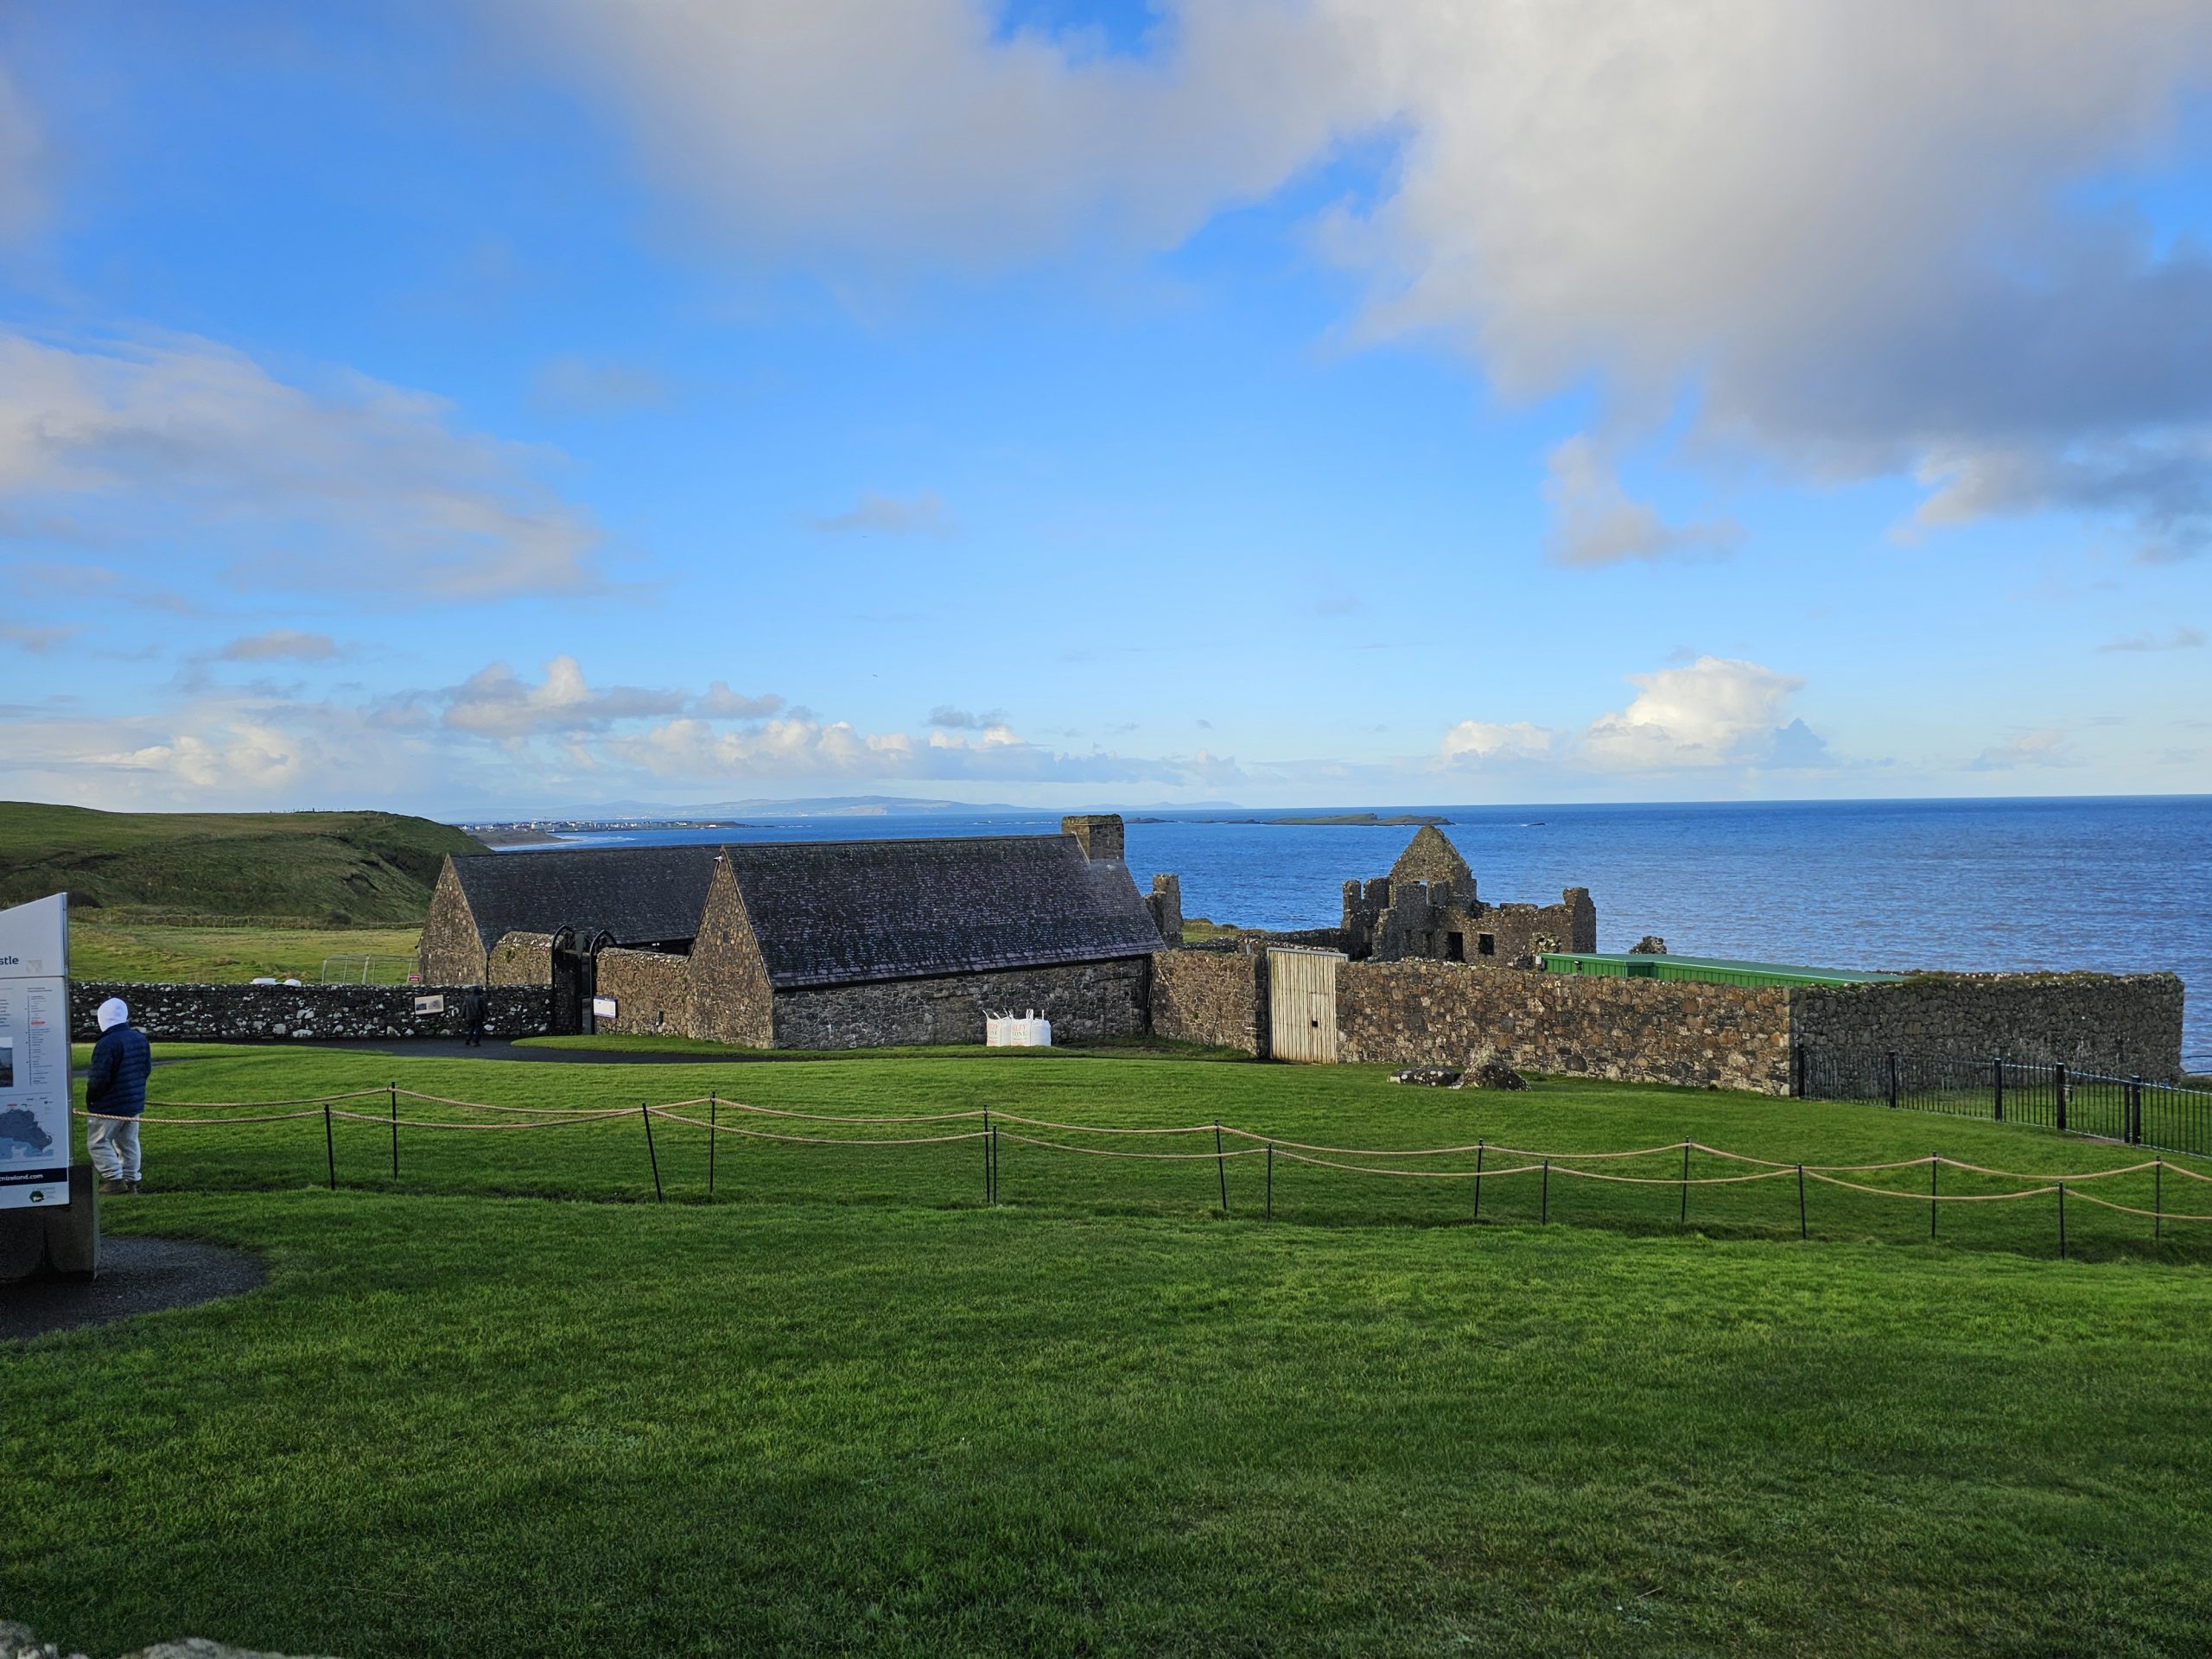 The lush fields and historic castles of Ireland overlooking the ocean